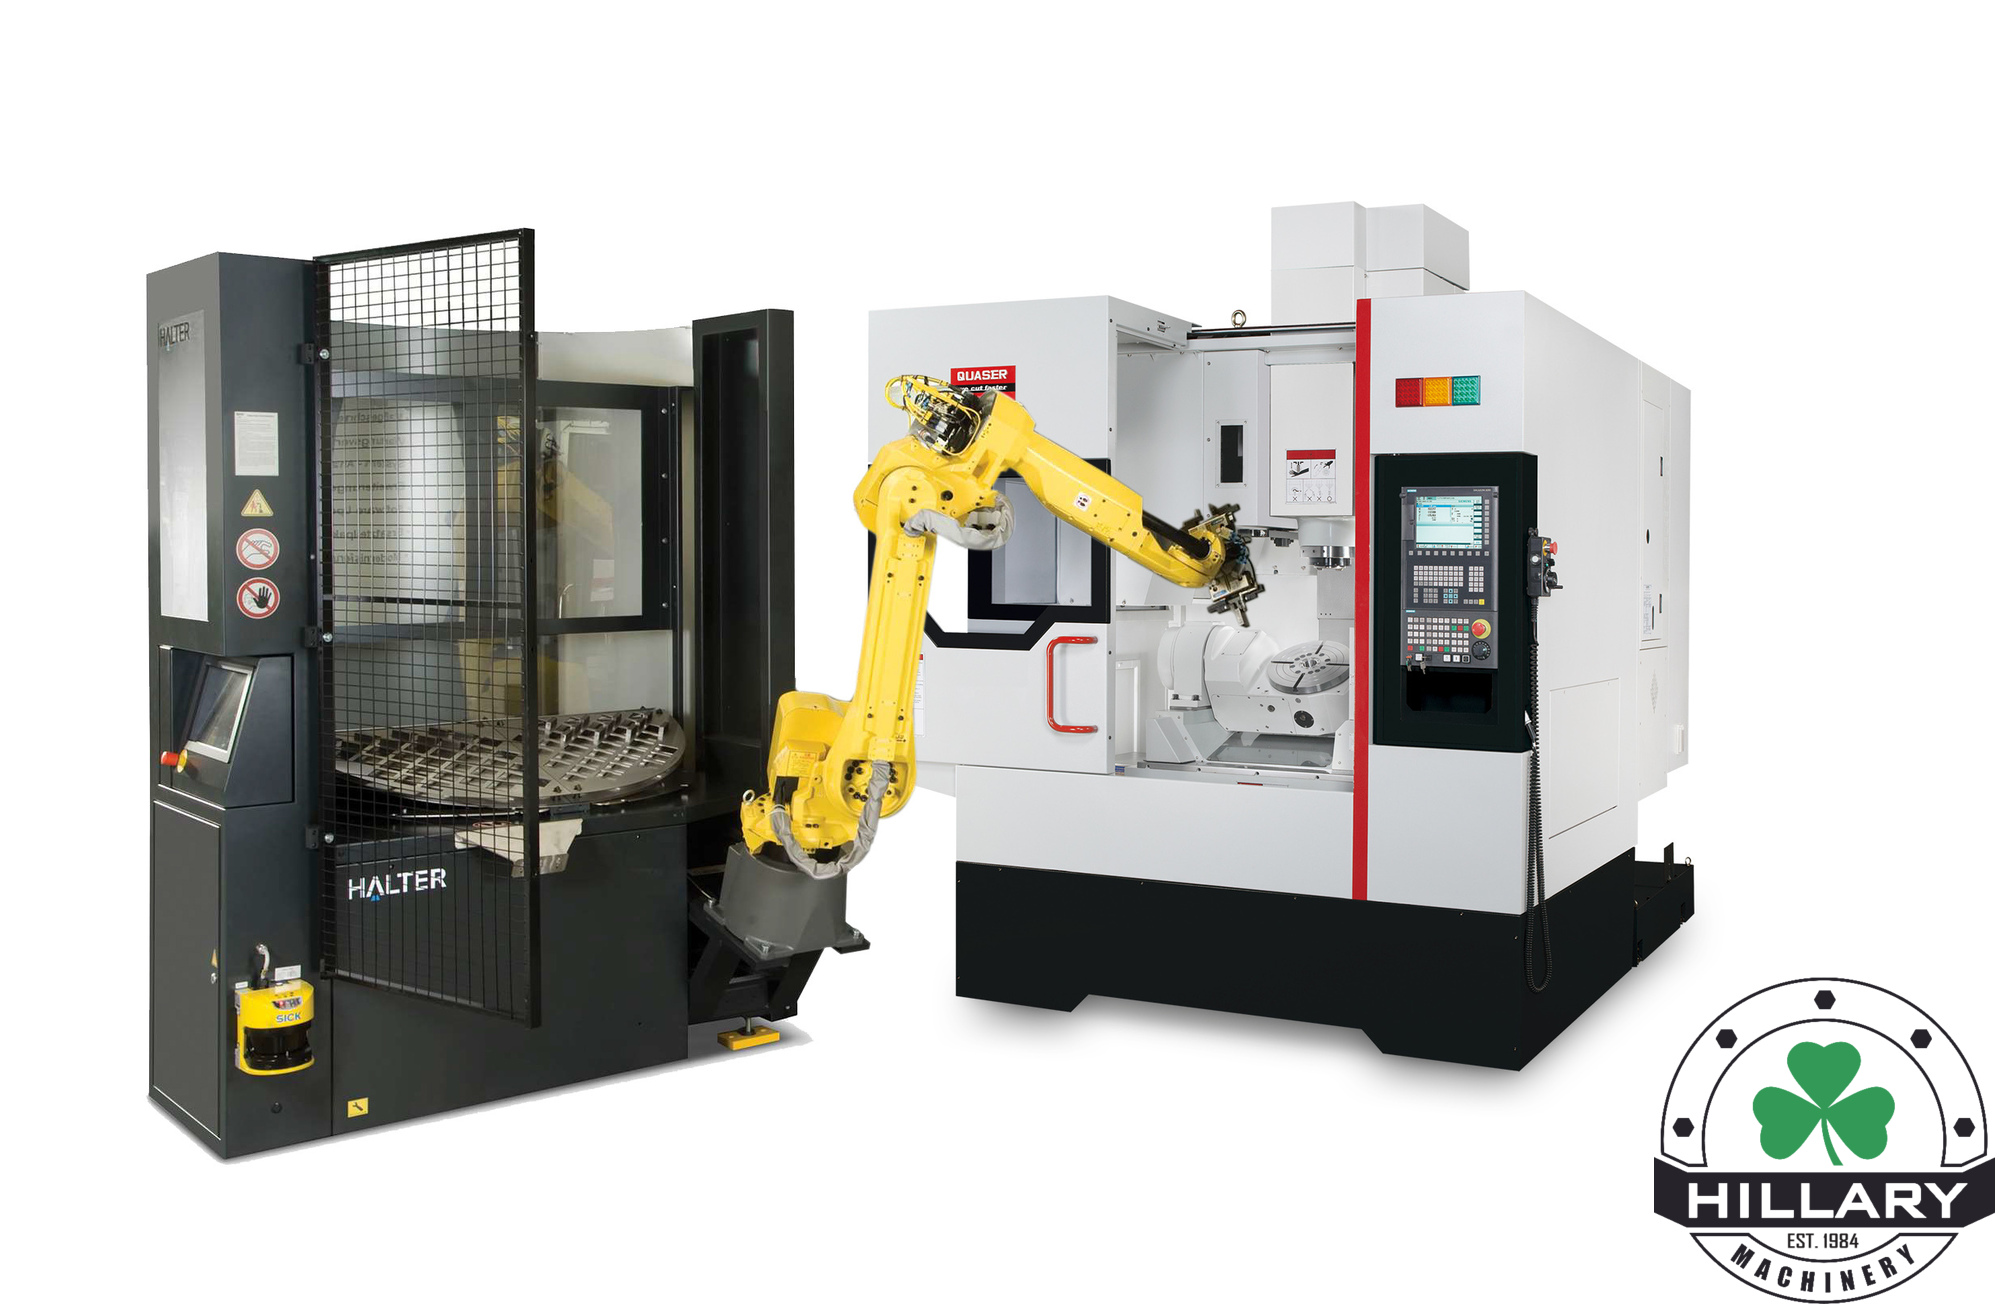 HALTER CNC AUTOMATION Millstacker Compact 12 Robot Machine Tending Systems | Hillary Machinery